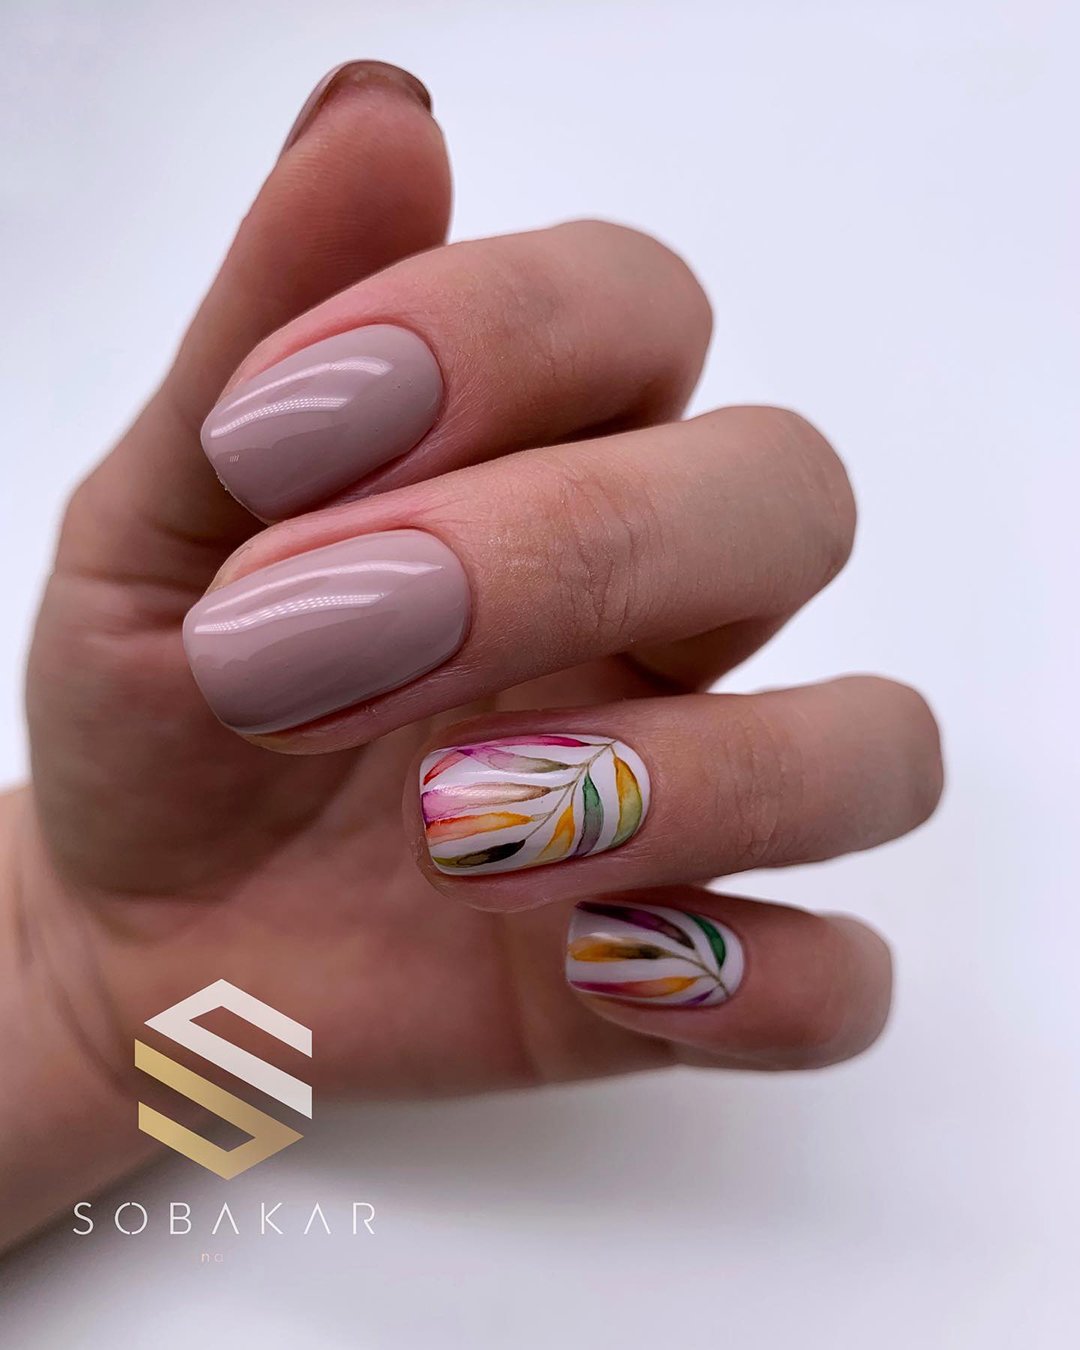 pinterest nails for wedding nude with colorful leaves sobakar_nails